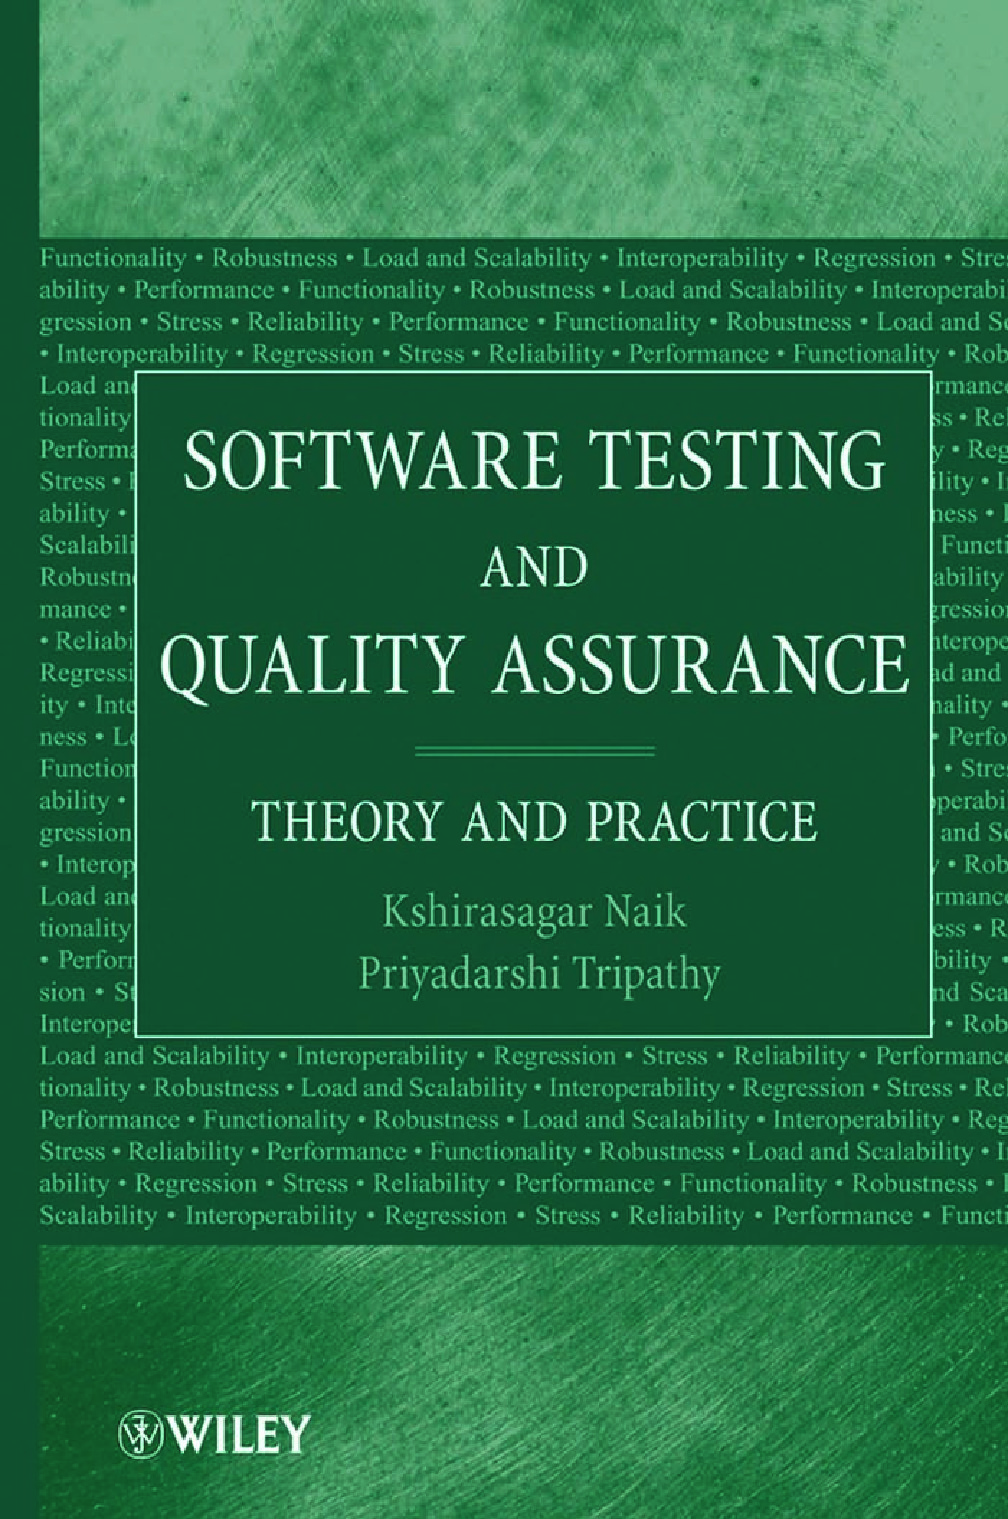 Software_Testing_and_Quality_Assurance_T